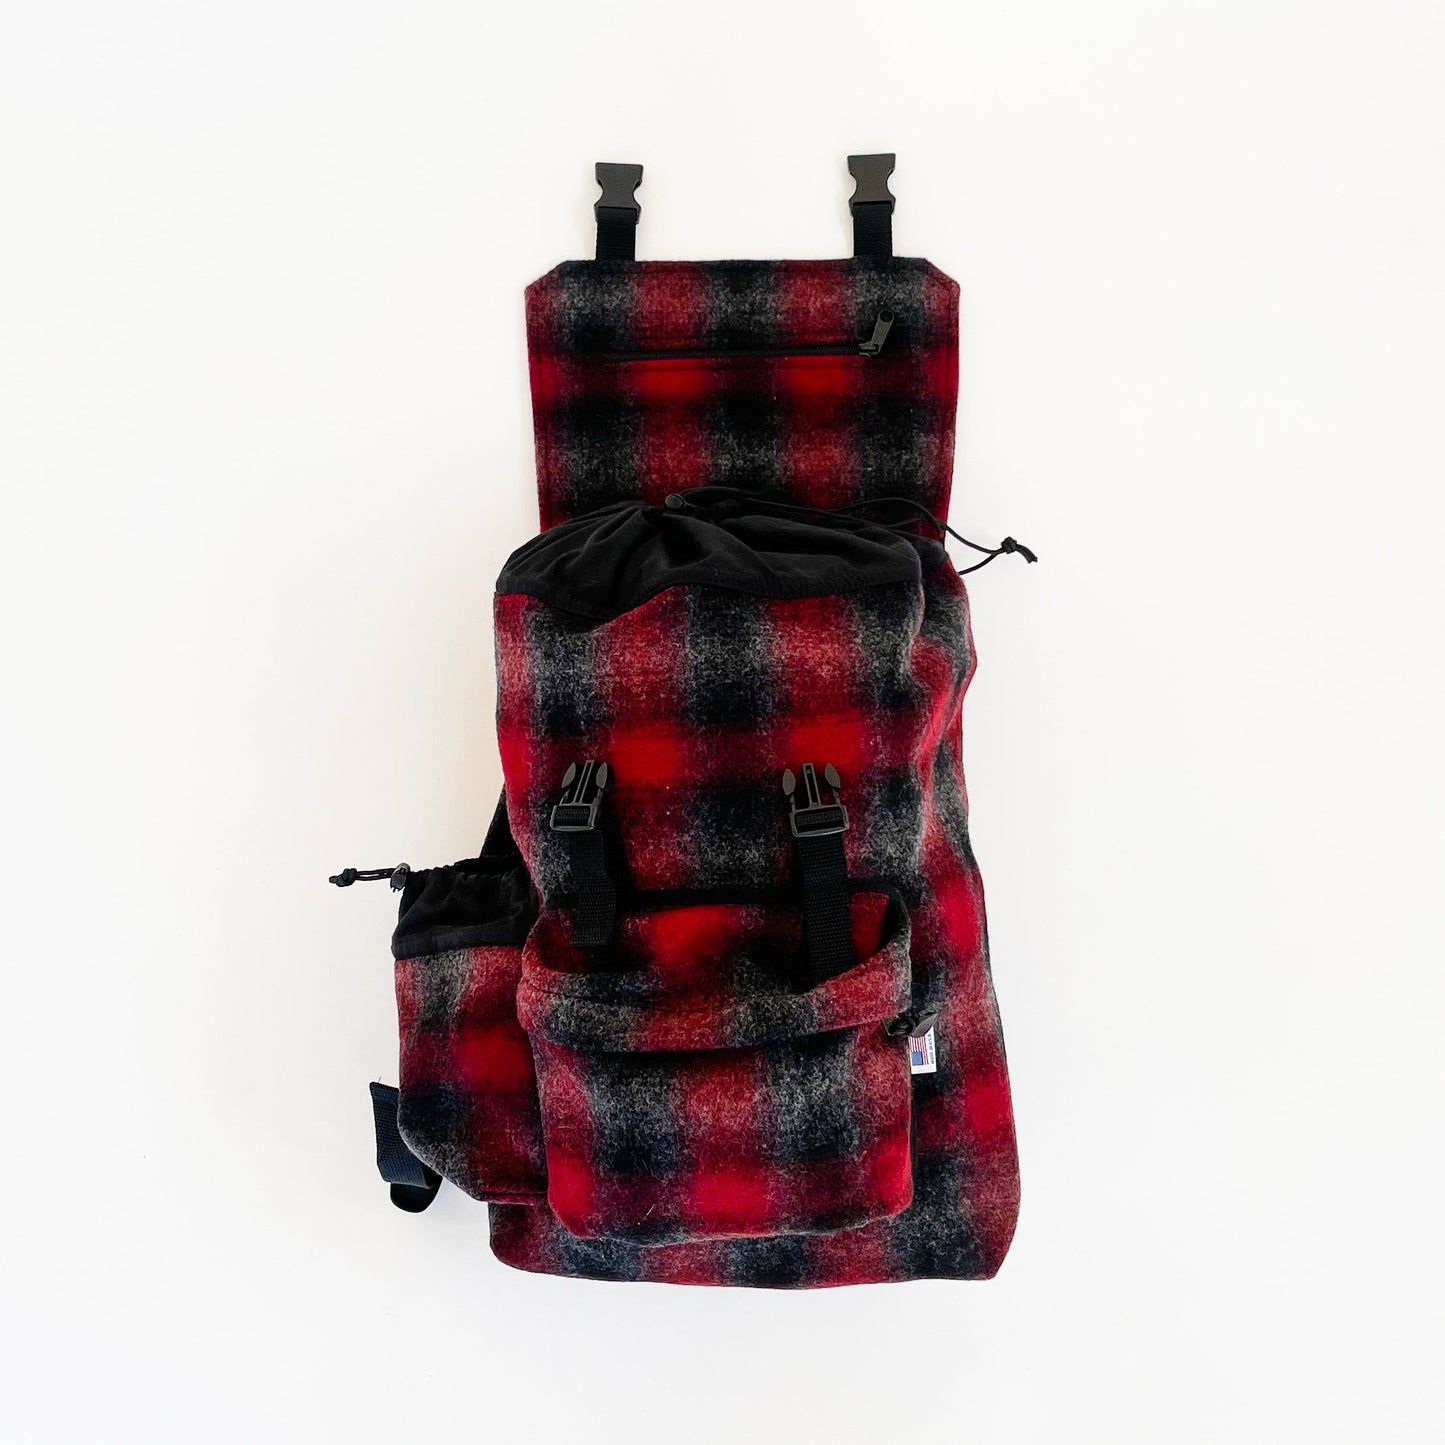 Wool back pack red , black and gray muted plaid with top flap open